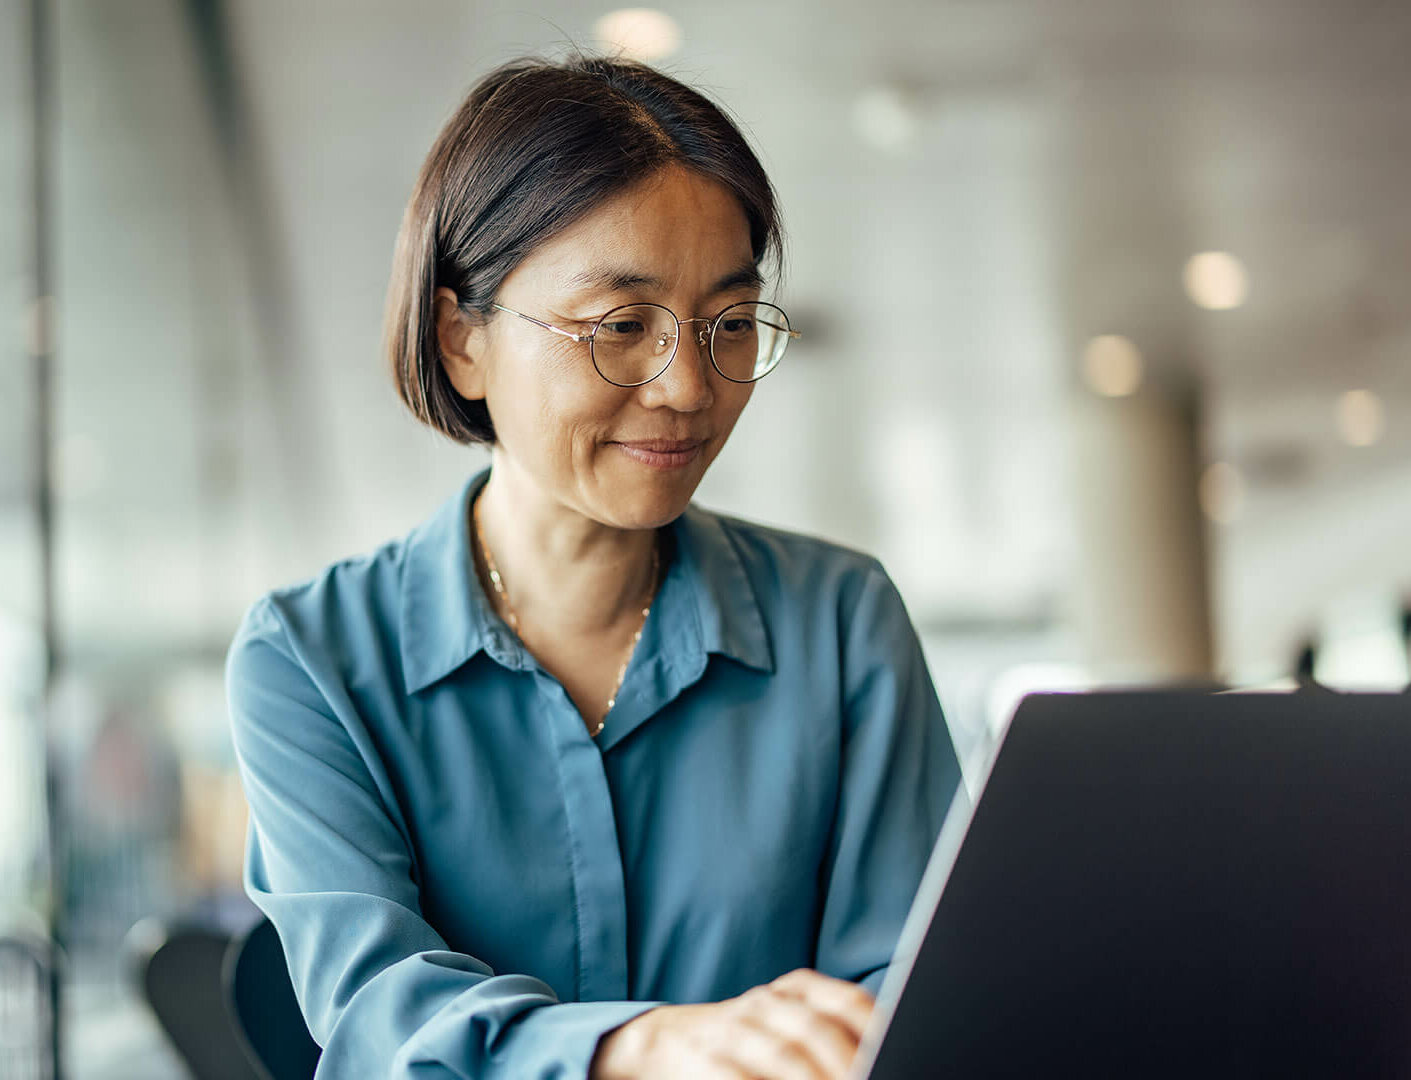 Asian woman looking at her laptop blurry background